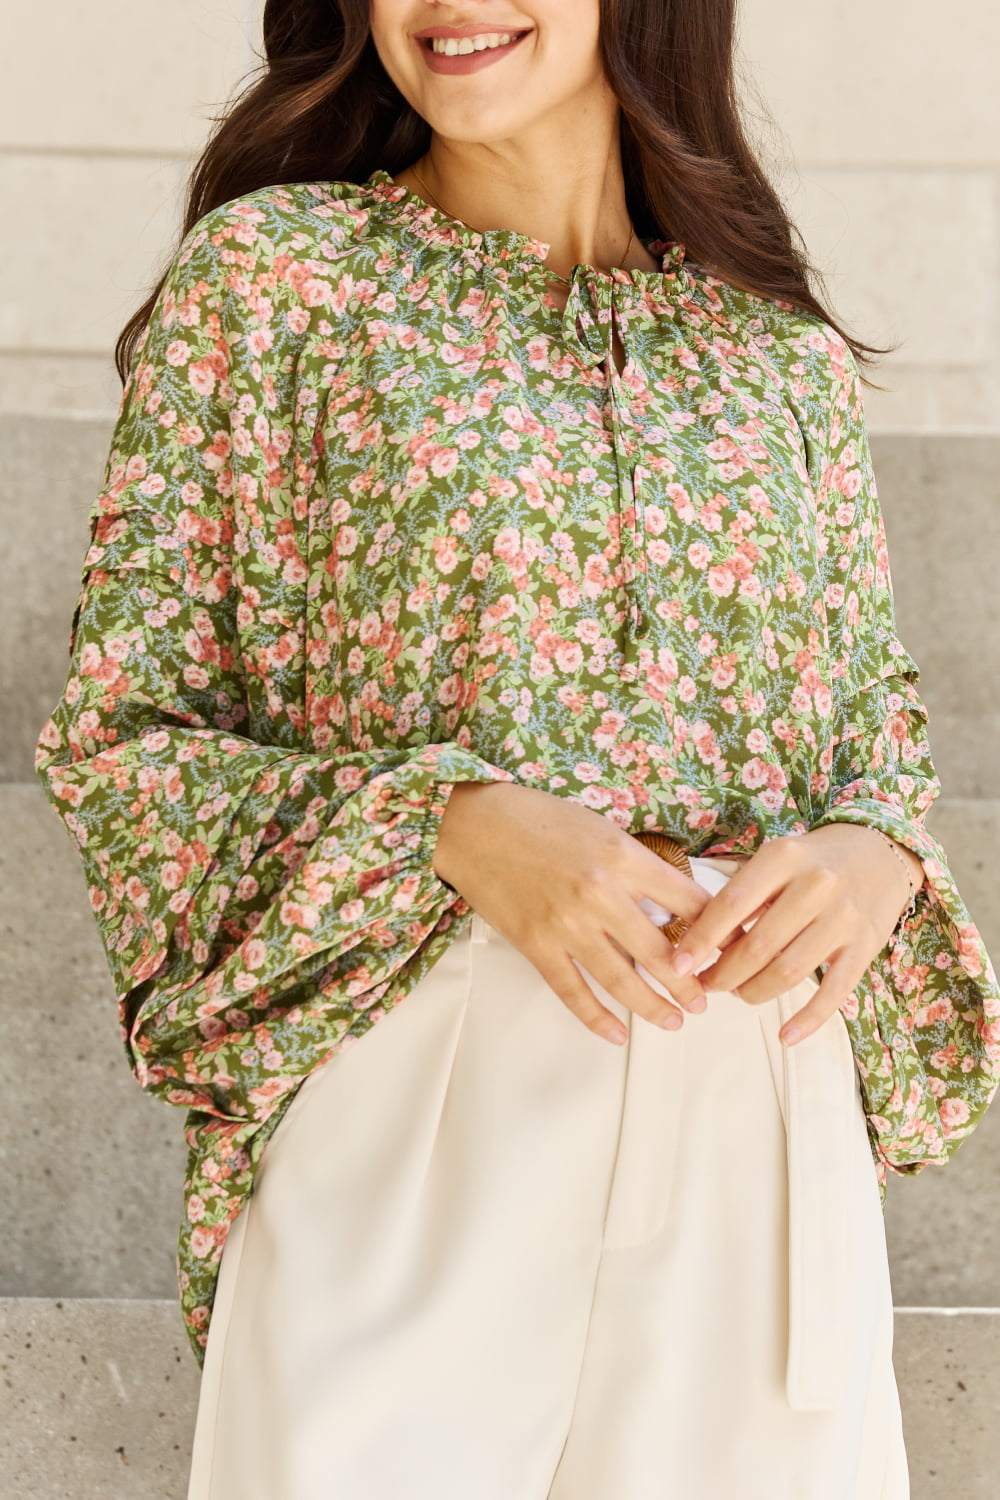 She’s Blossoming Full Size Balloon Sleeve Floral Blouse - Women’s Clothing & Accessories - Dresses - 11 - 2024